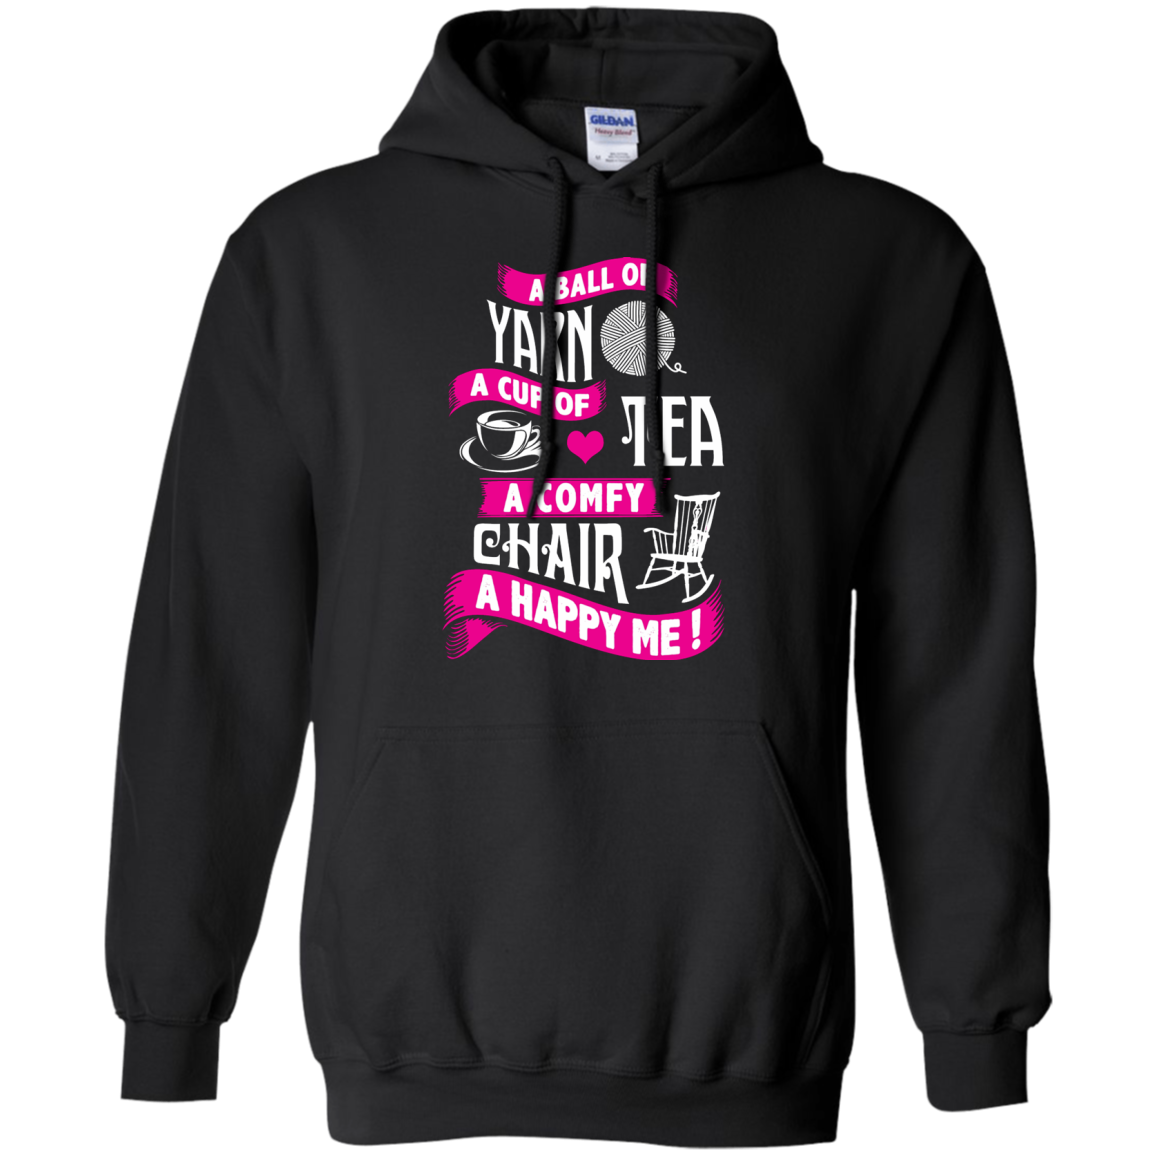 A Ball of Yarn Pullover Hoodie